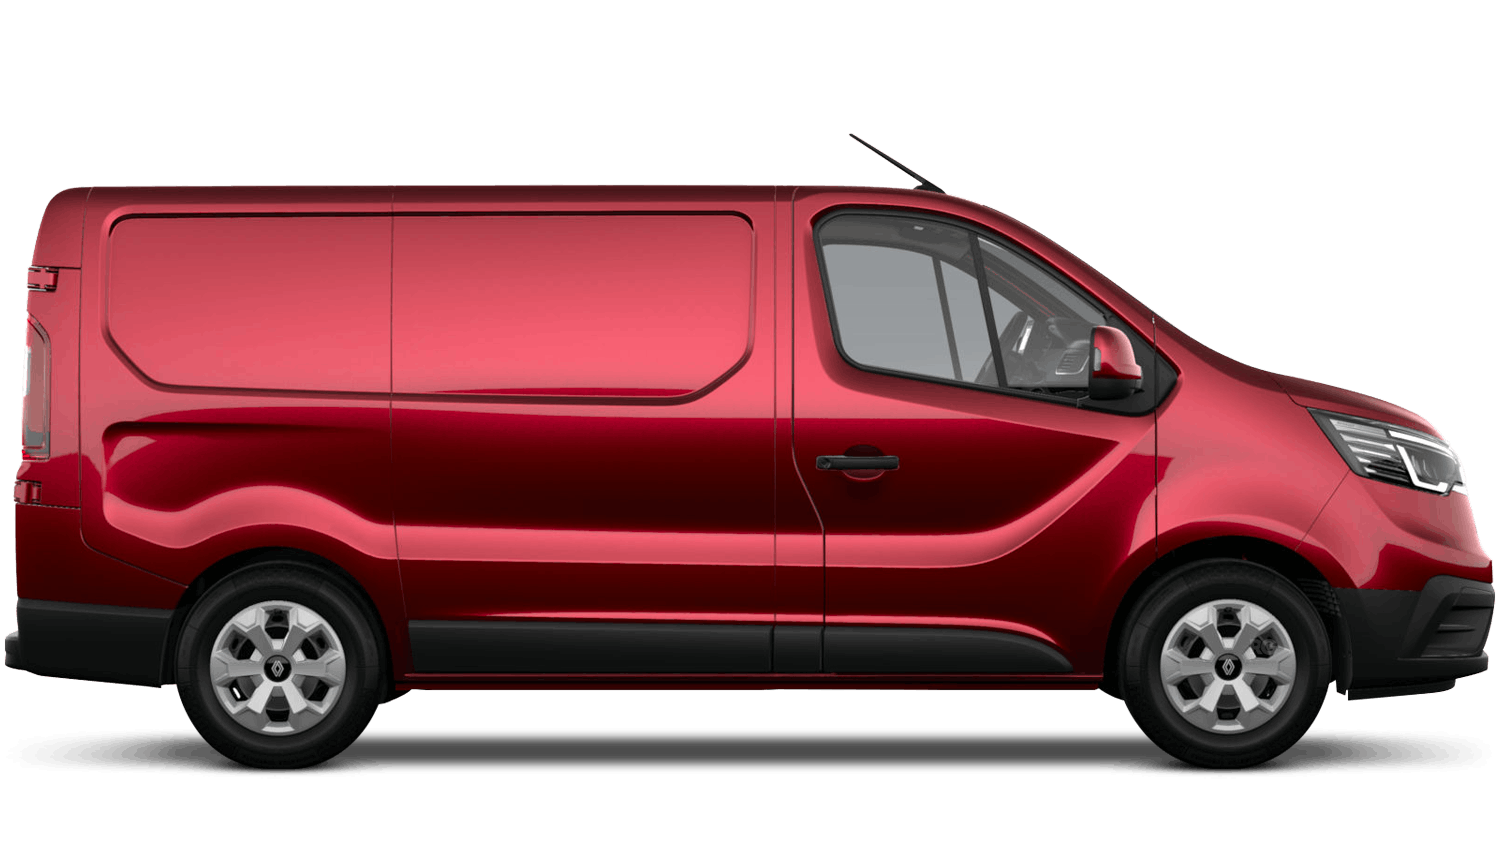 Renault Trafic E-Tech 100% electric Contract Hire Offer